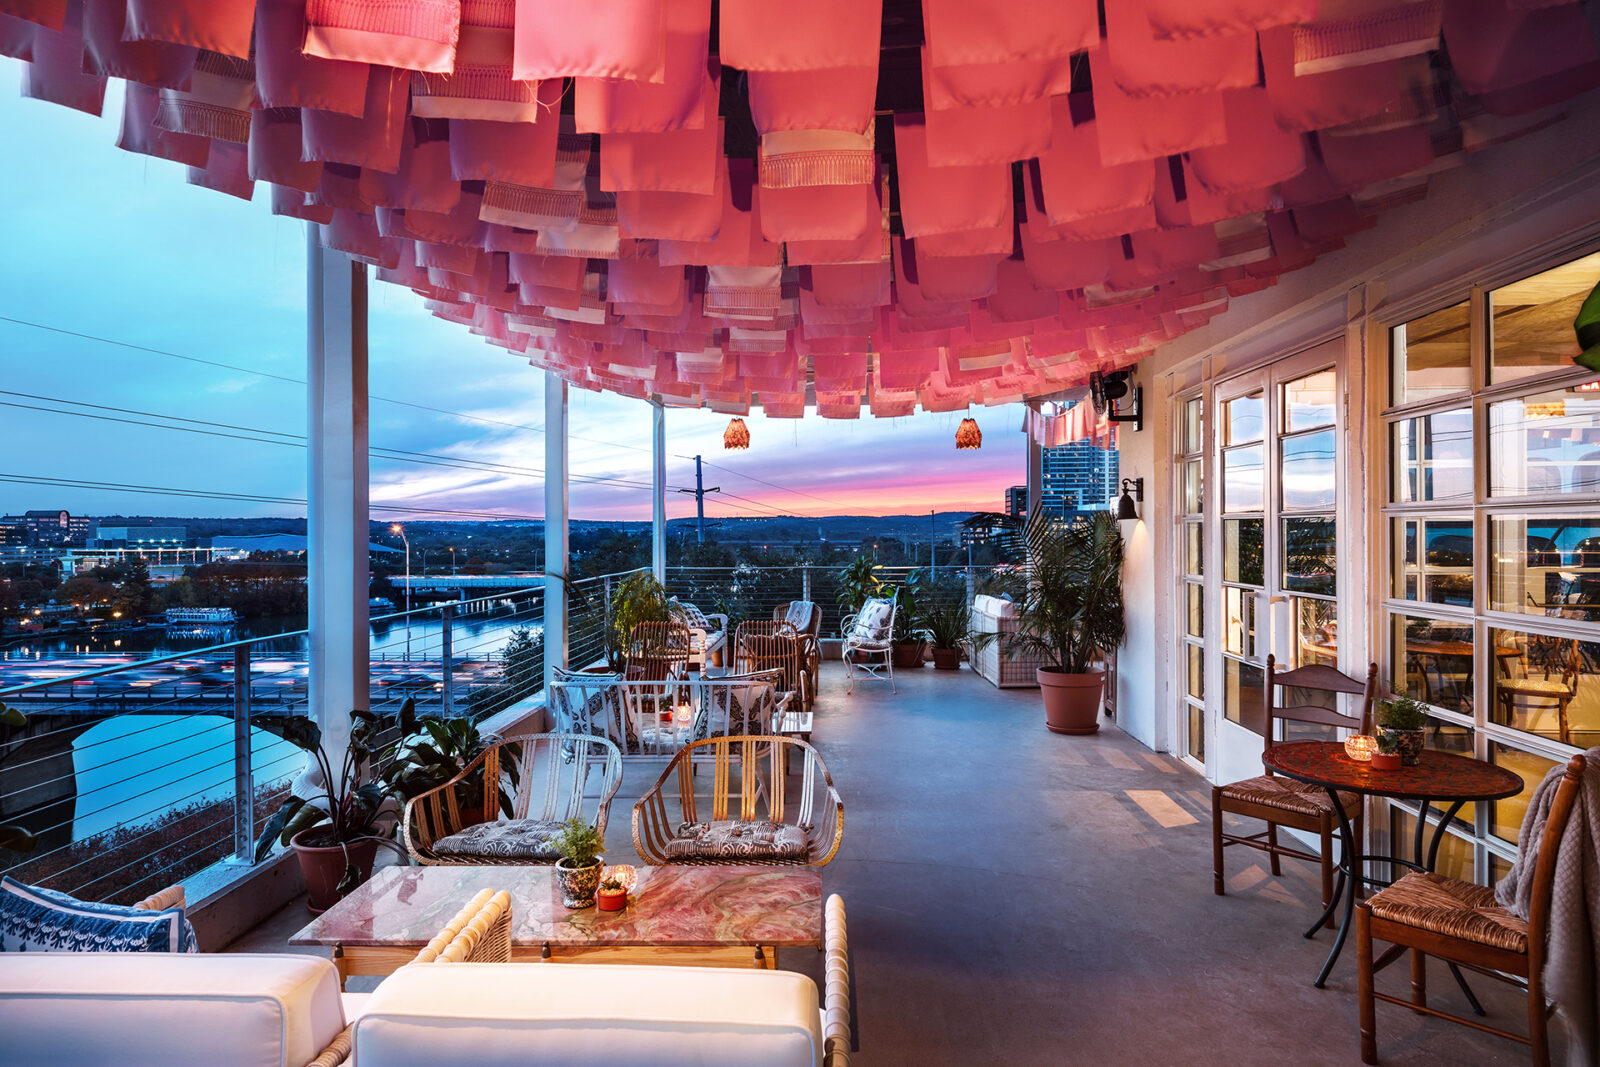 Rooftop seating is adorned with some party decoration and a stunning city view.